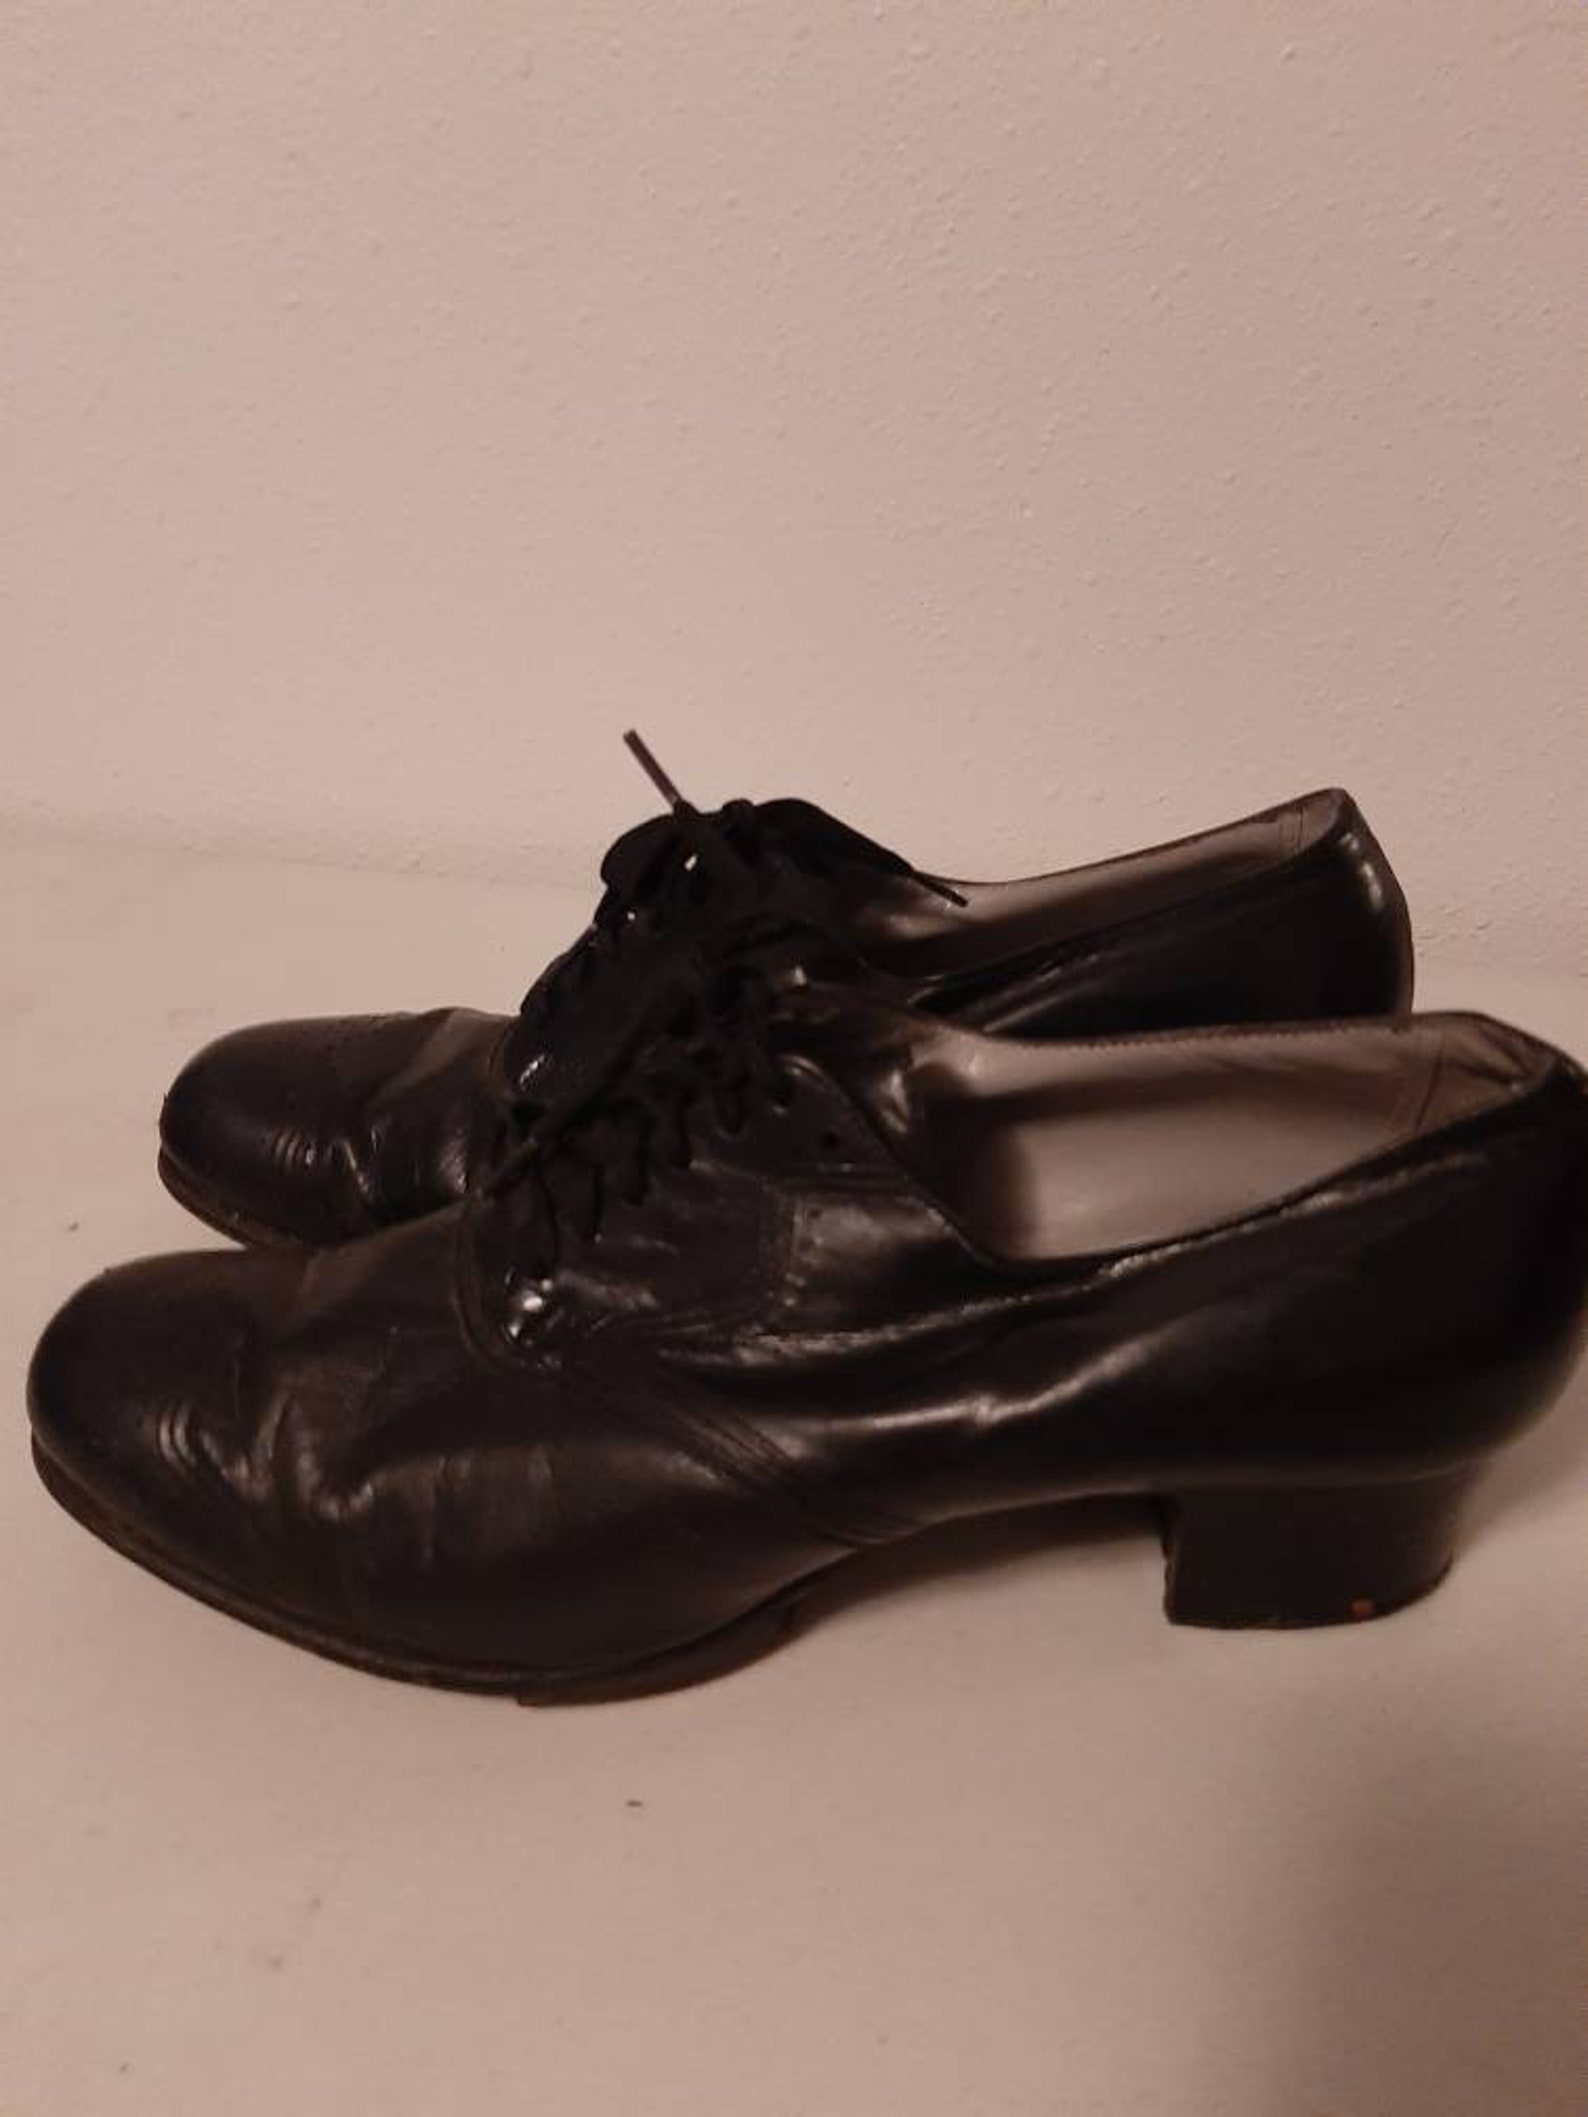 1930s-40s Womens Black Leather Selby Oxford Tie Shoes With | Etsy